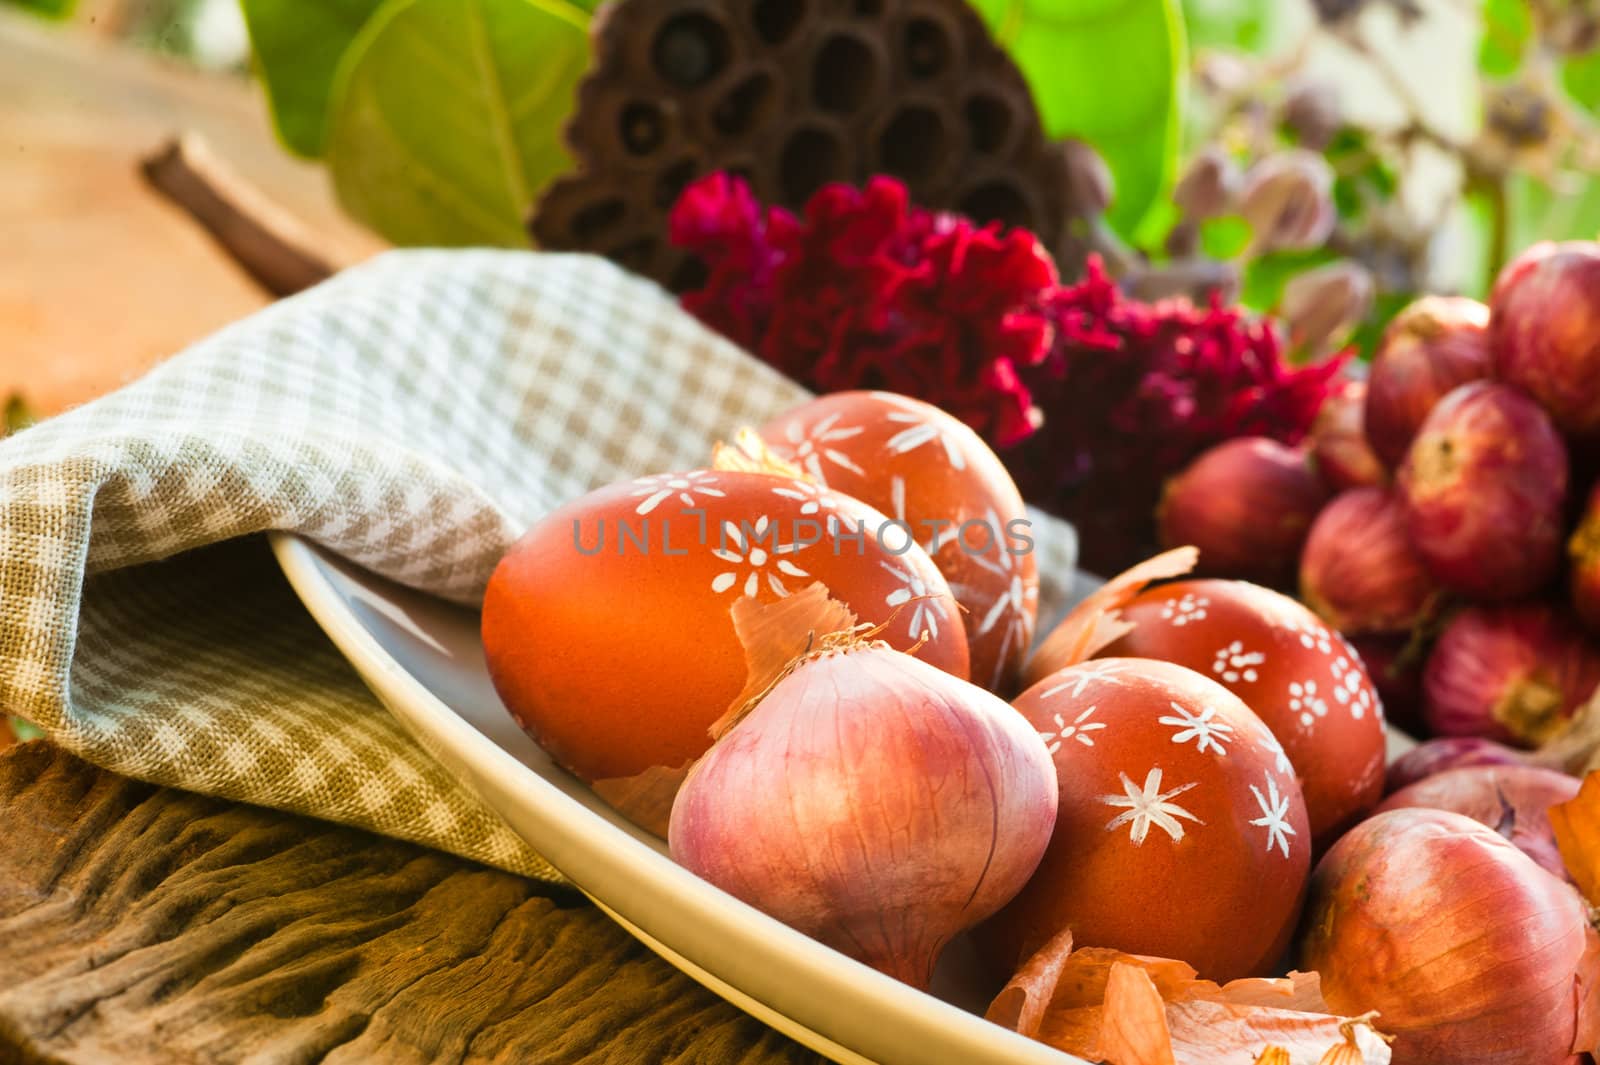 Naturally colored Easter eggs with onion skin and hand-painted